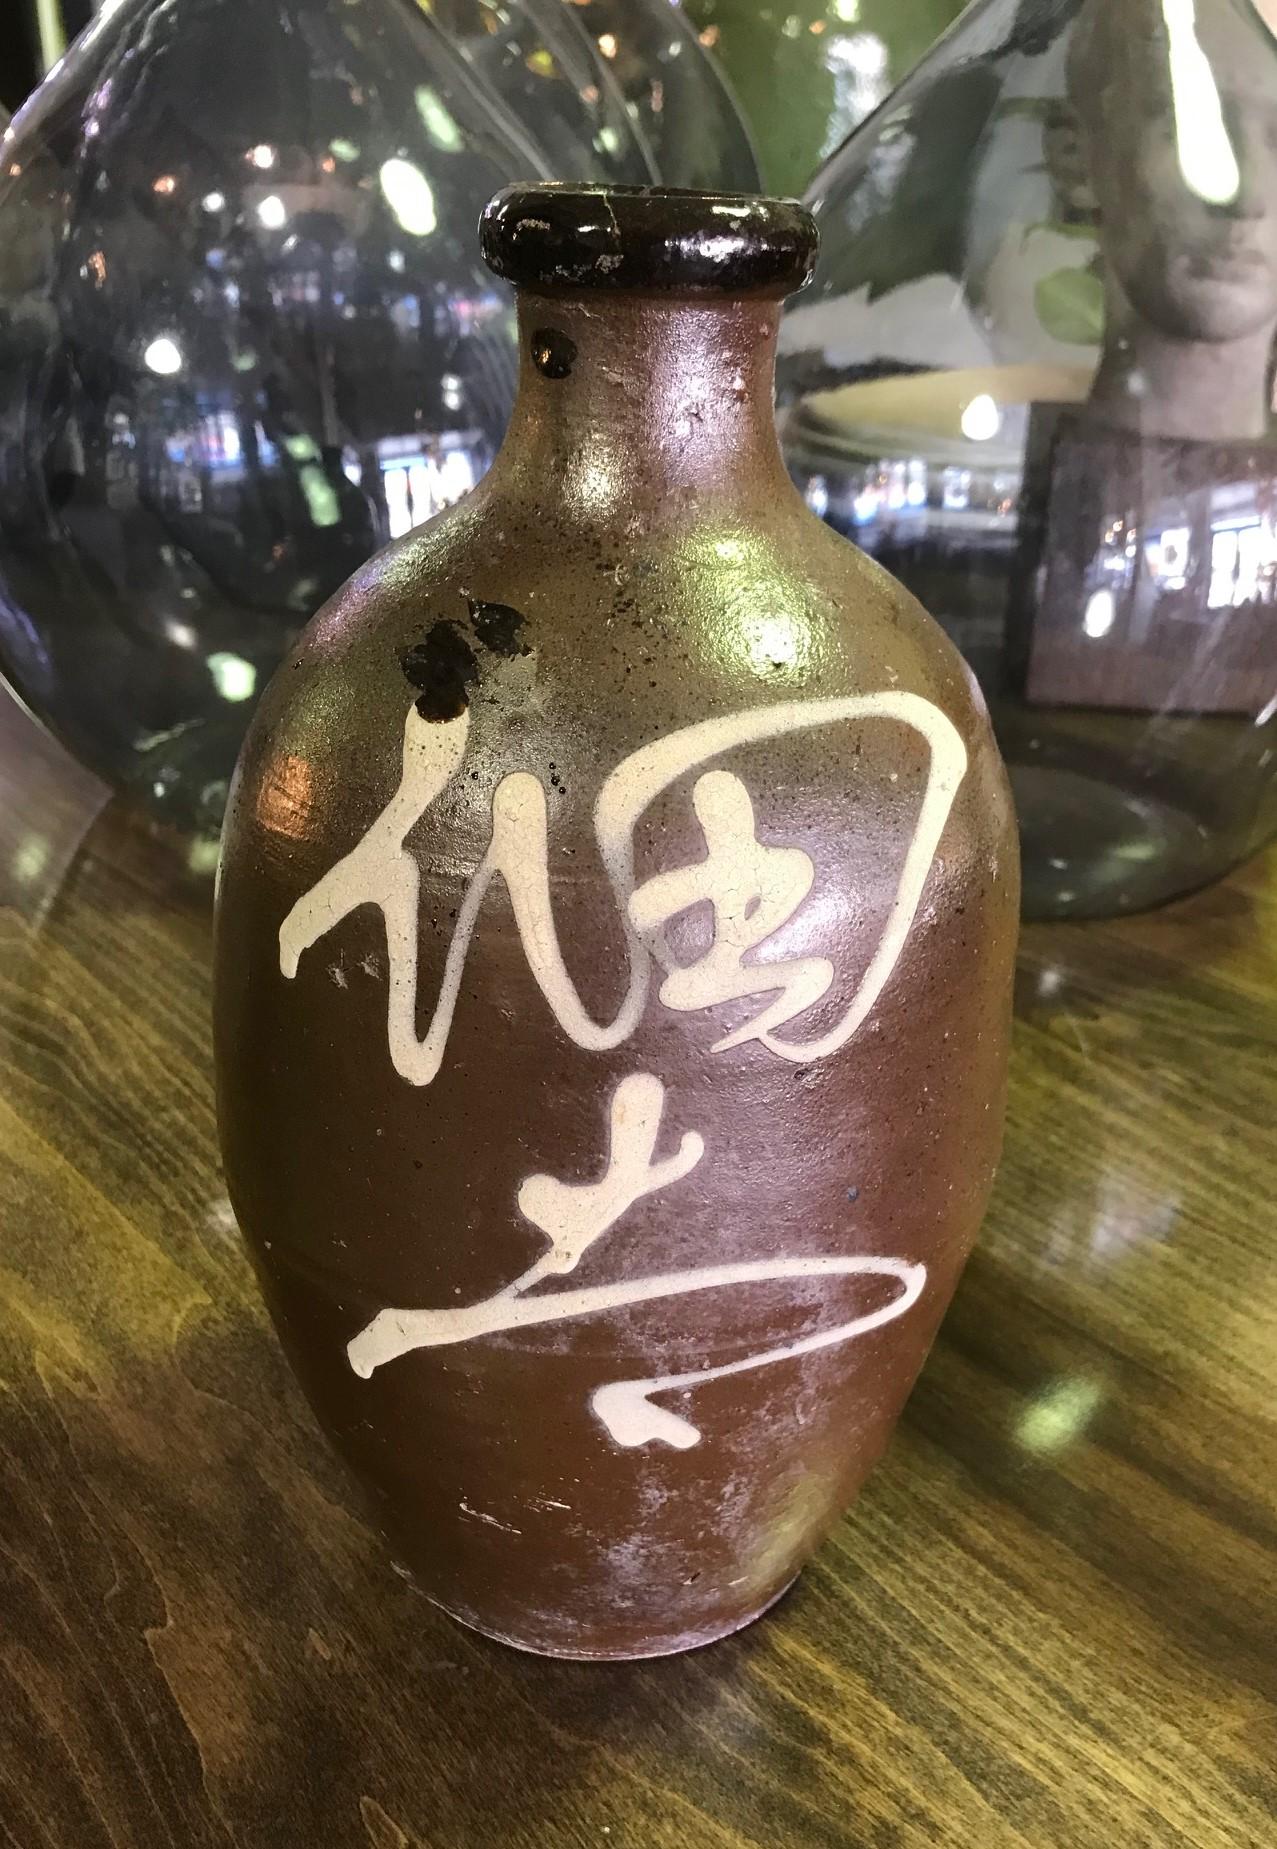 A very eye-catching and wonderfully decorated piece.

Freely hand painted with calligraphy/ Kanji characters and beautifully glazed.

Would be a nice addition to any Japanese ceramic collection and sure to stand out in about any